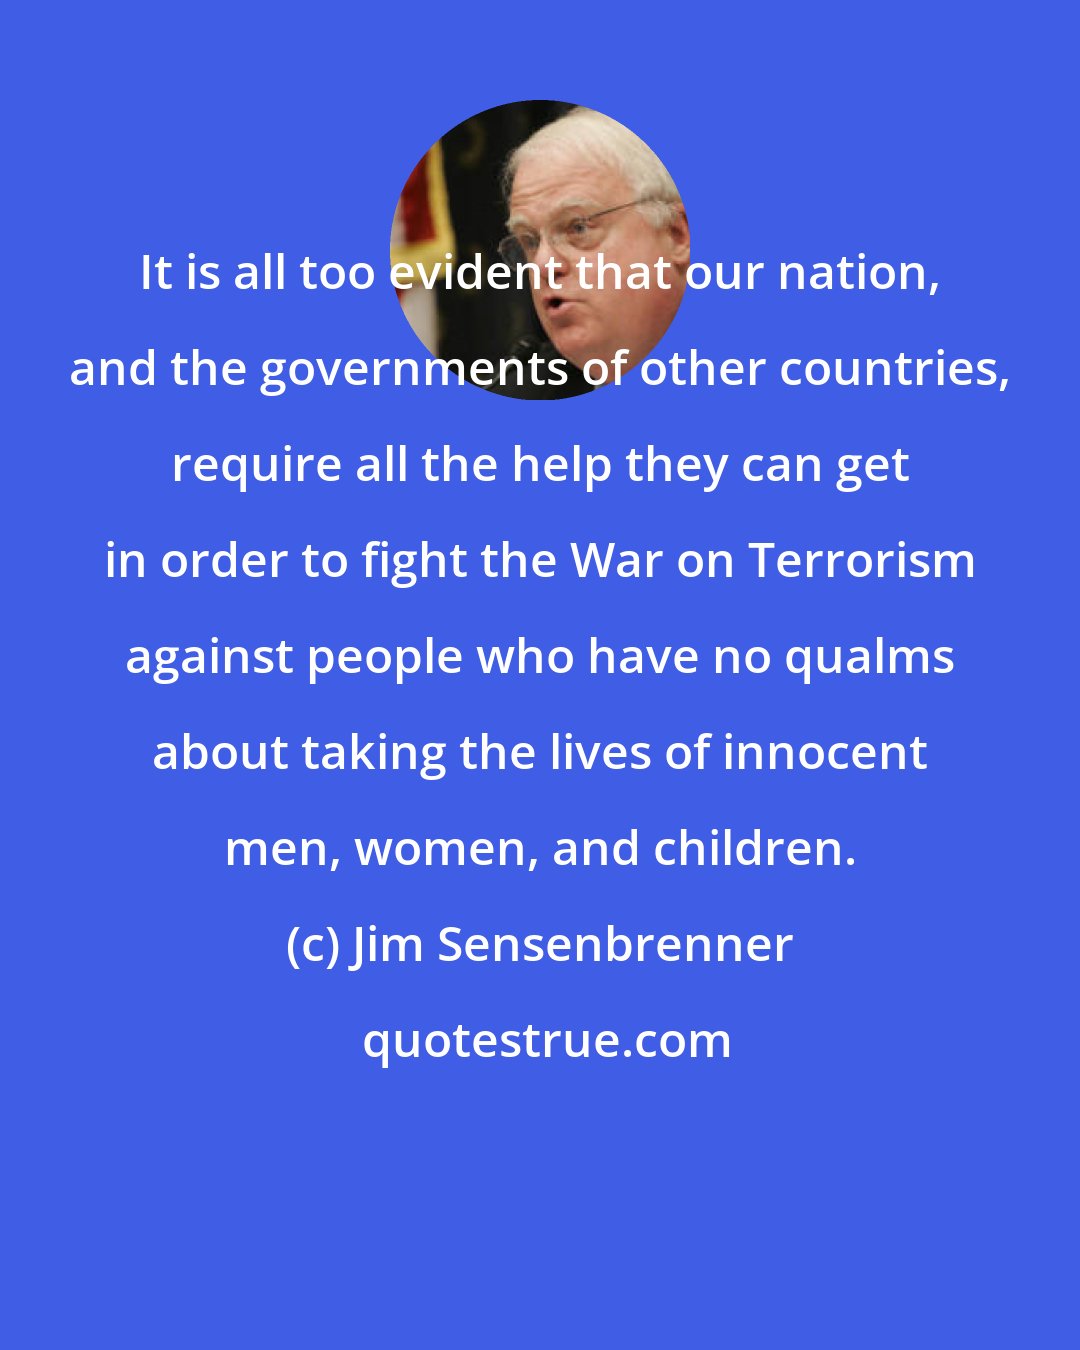 Jim Sensenbrenner: It is all too evident that our nation, and the governments of other countries, require all the help they can get in order to fight the War on Terrorism against people who have no qualms about taking the lives of innocent men, women, and children.